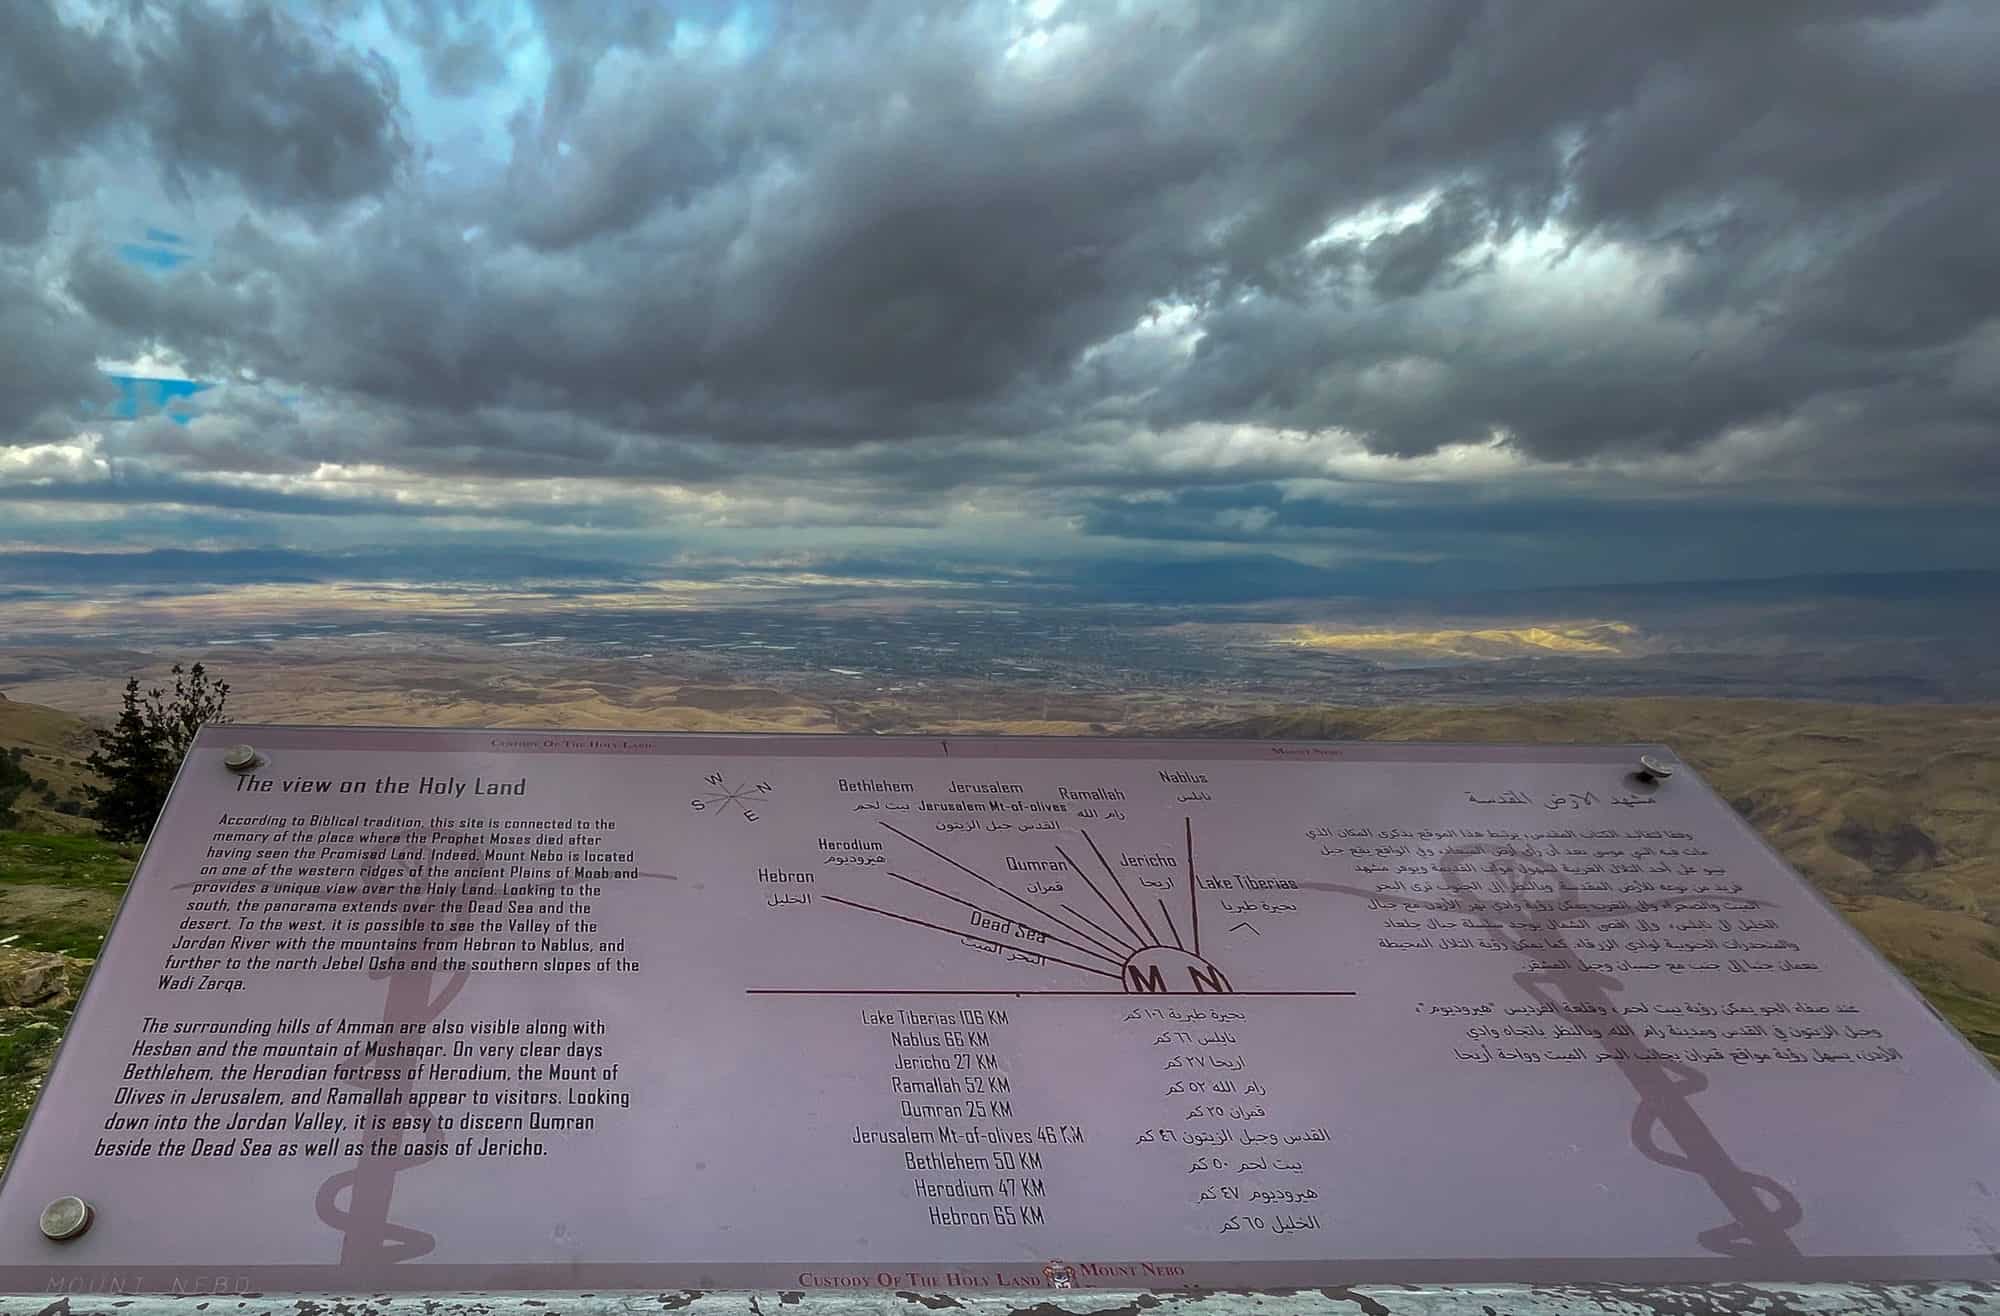 Jordan - Mt Nebo - view of the promised land